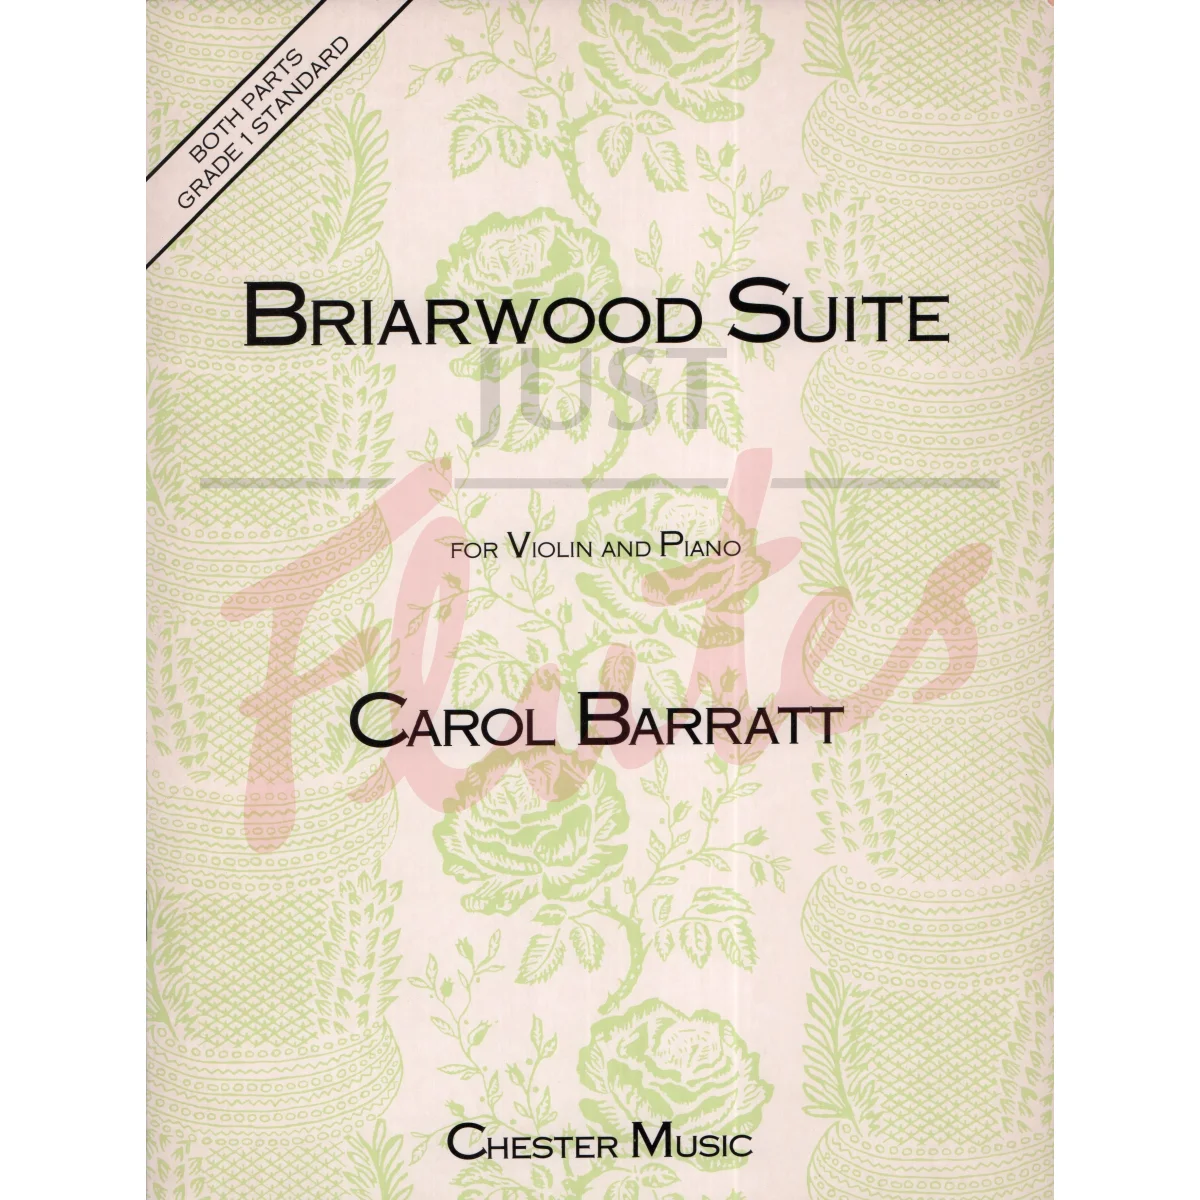 Briarwood Suite for Violin and Piano